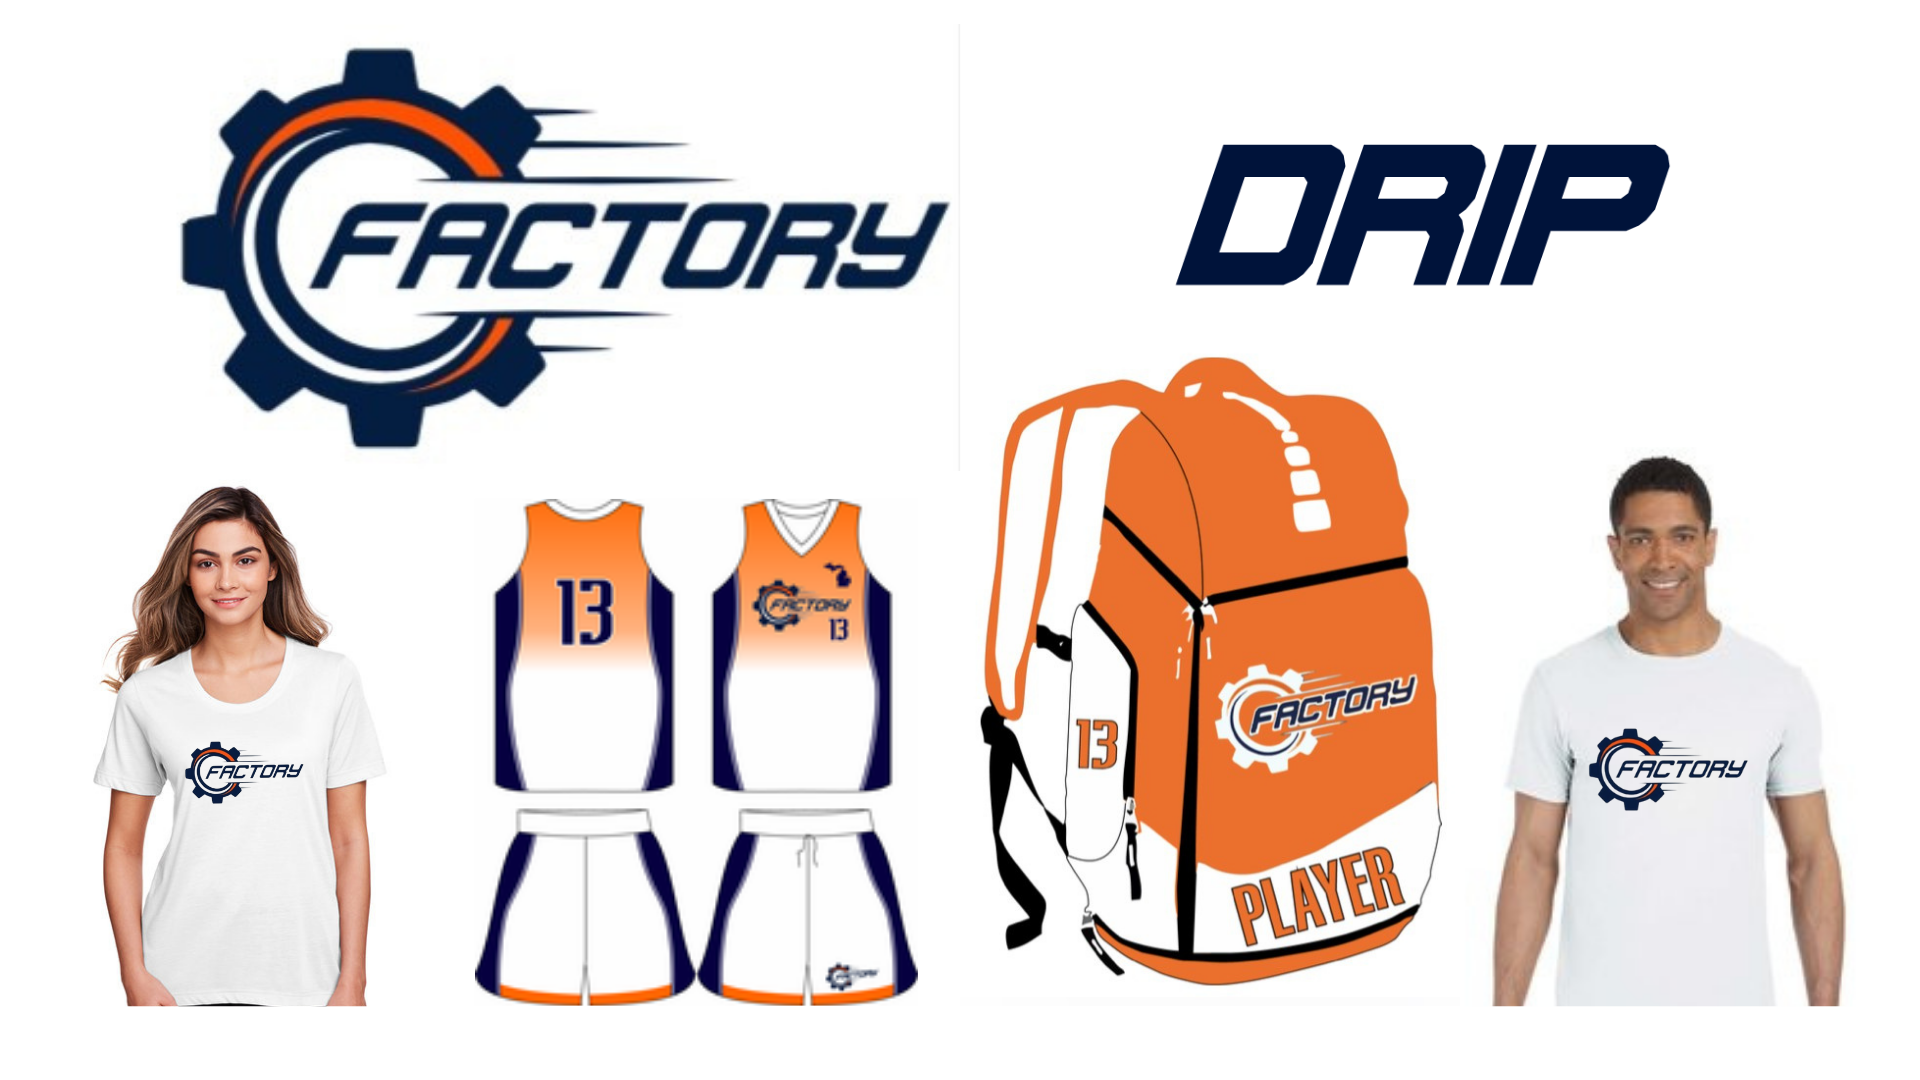 Get your Factory Basketball gear here